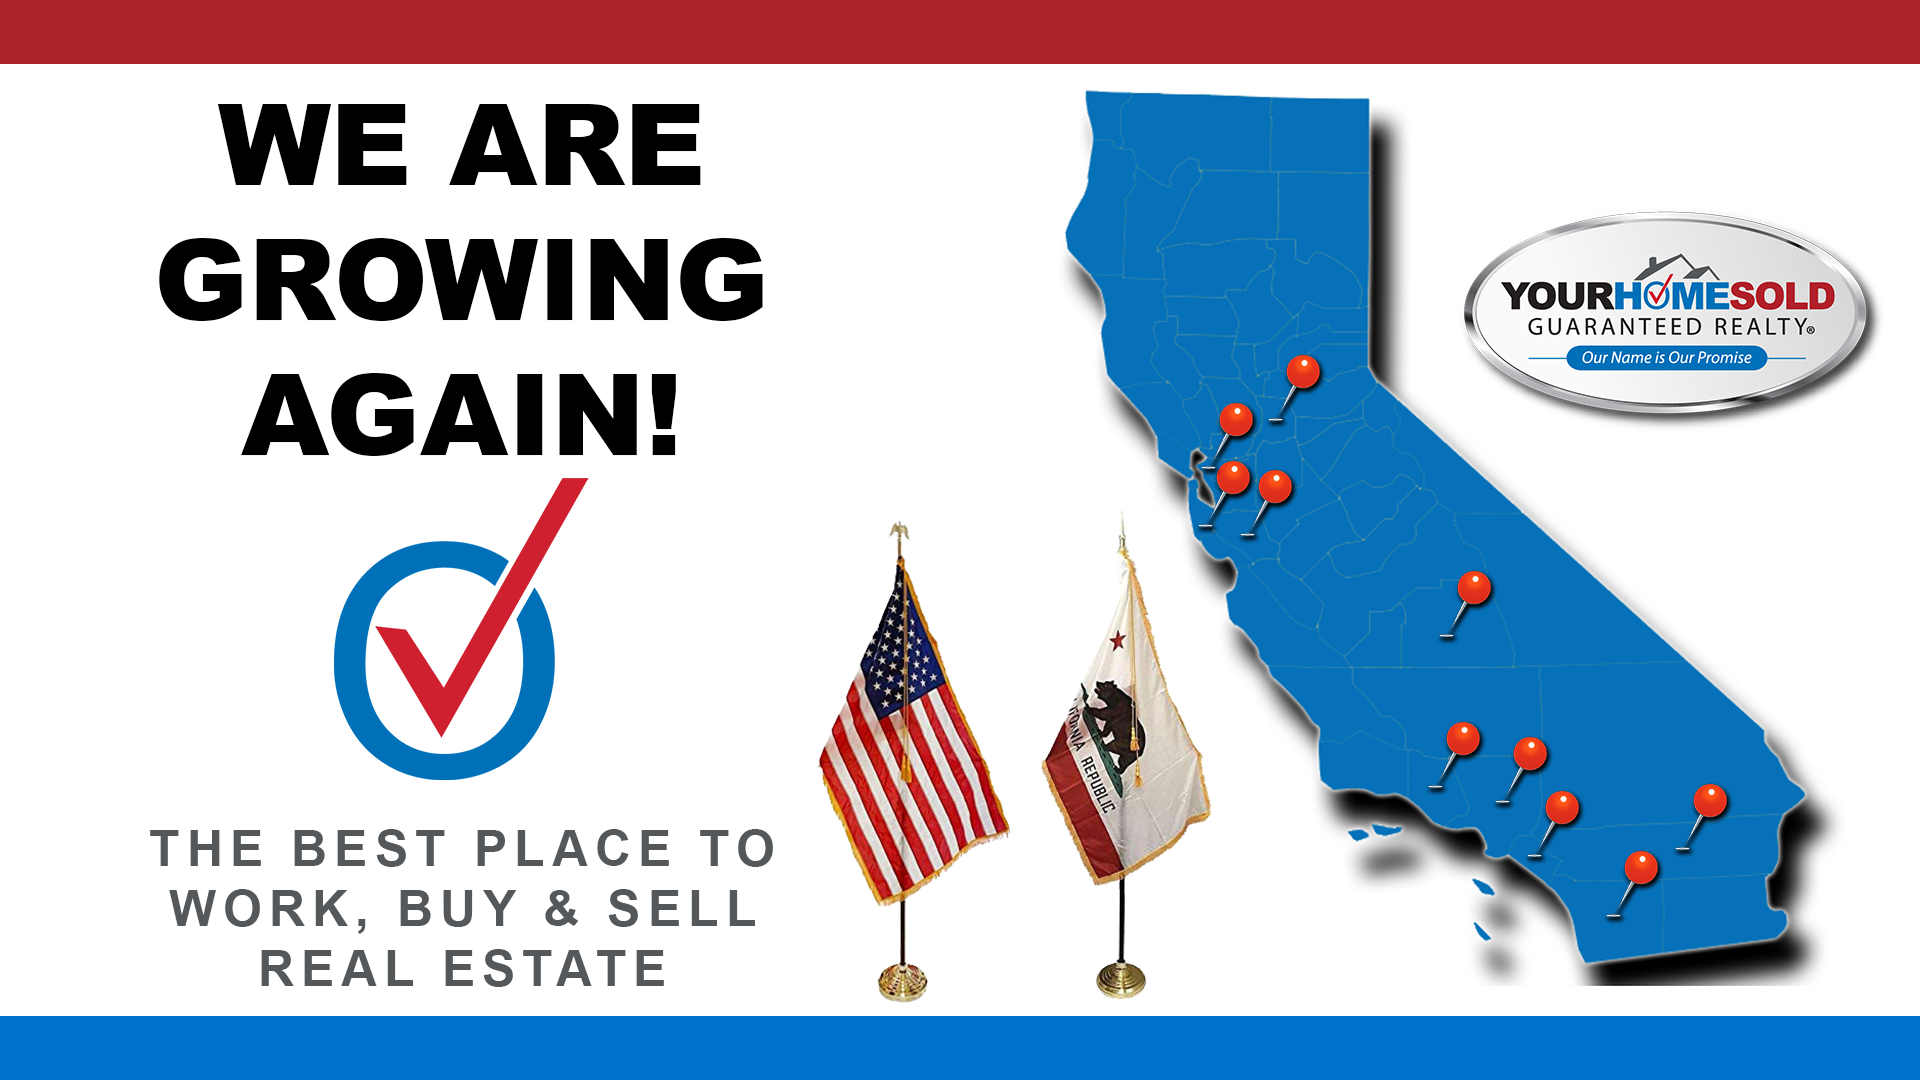 Your-Home-Sold-Guaranteed-Realty-Is-Expanding-Its-Team-Of-Agents-To-Serve-The-NorCal-and-SoCal-Regions.png